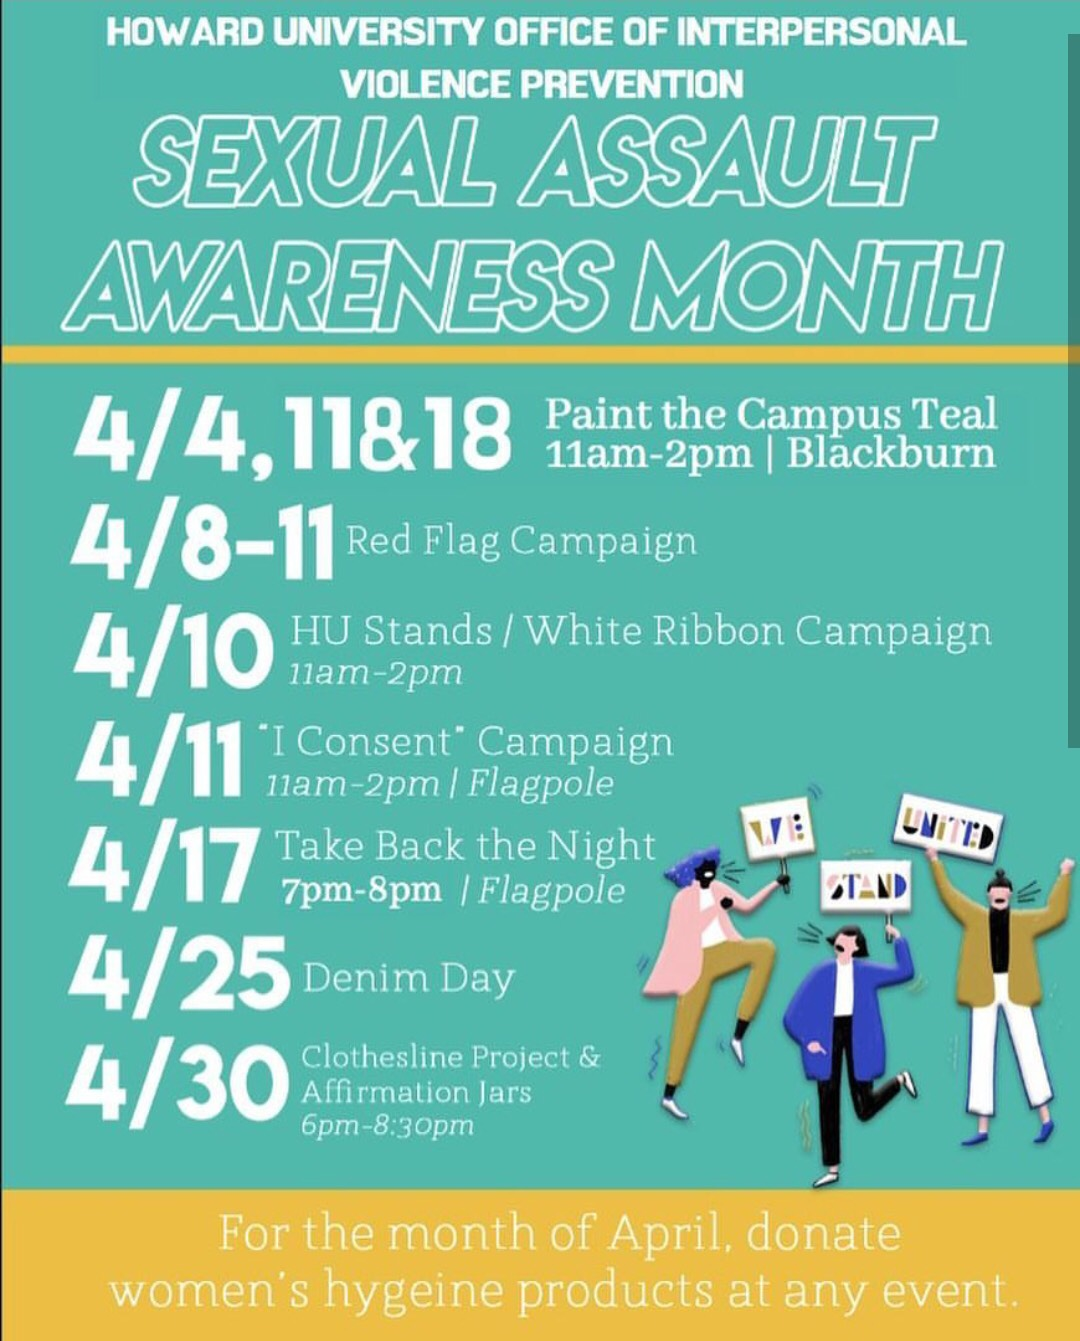 howard-university-hosts-series-of-events-in-honor-of-sexual-assault